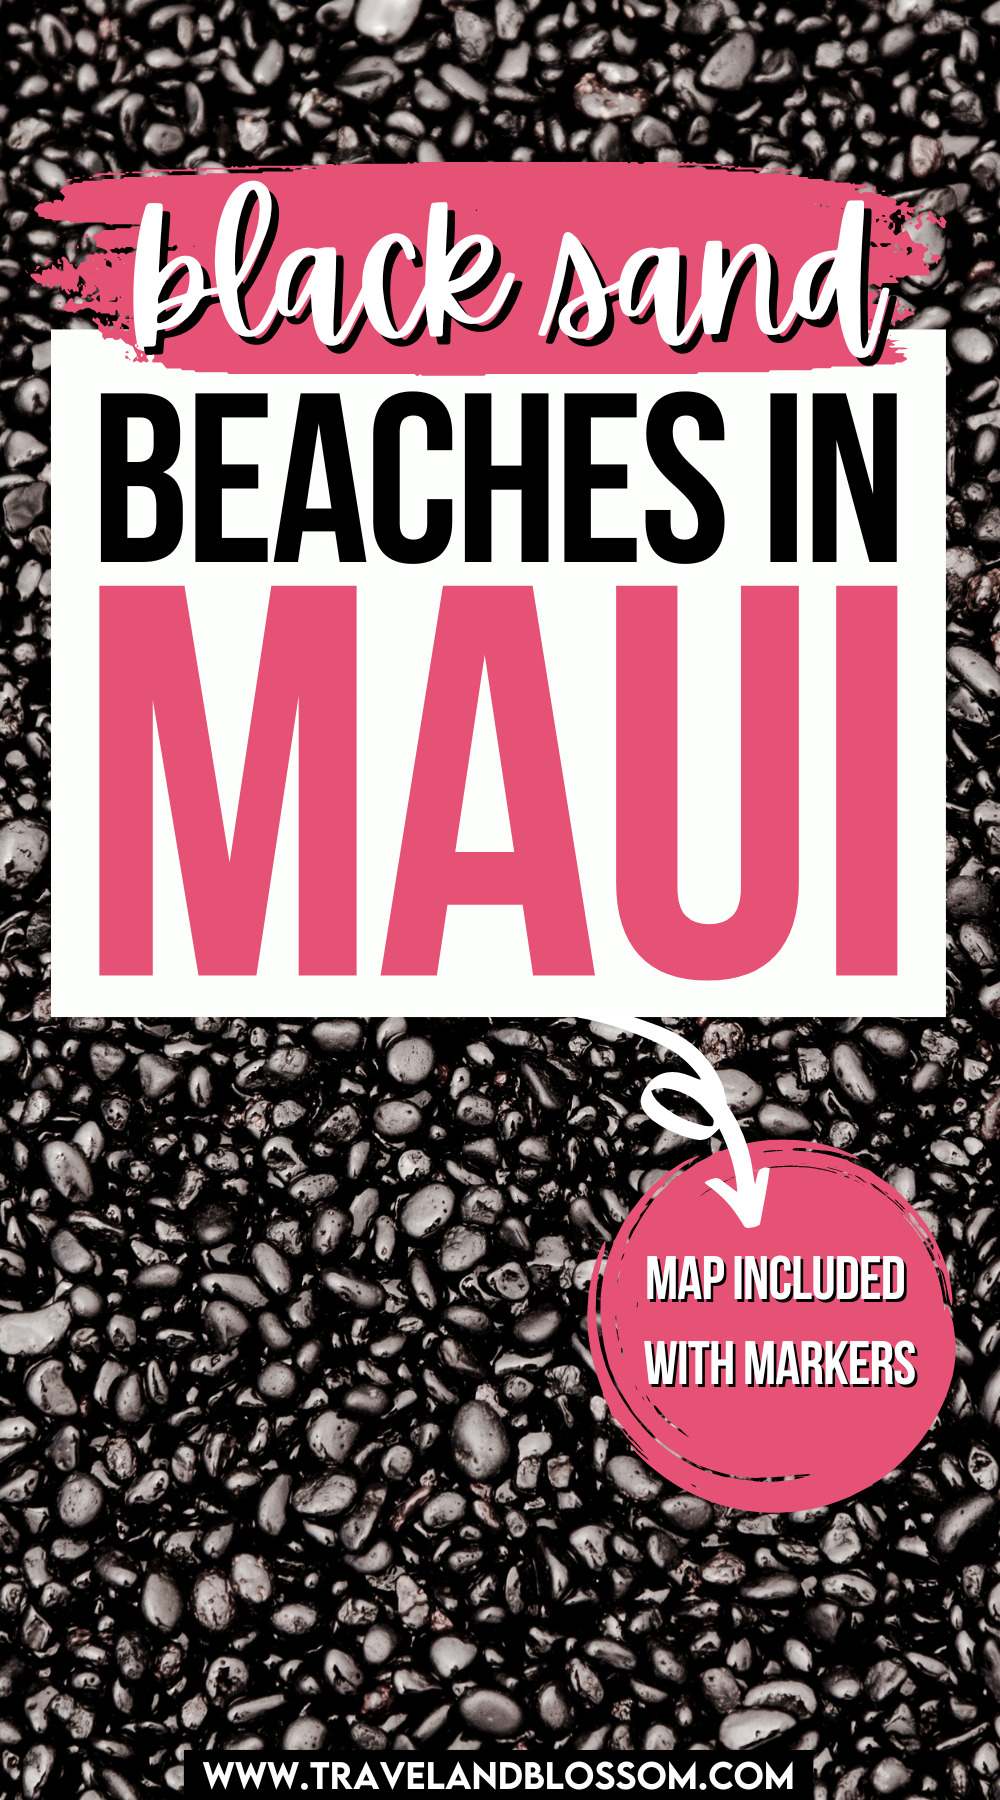 The 7 Most Amazing Black Sand Beaches in Maui